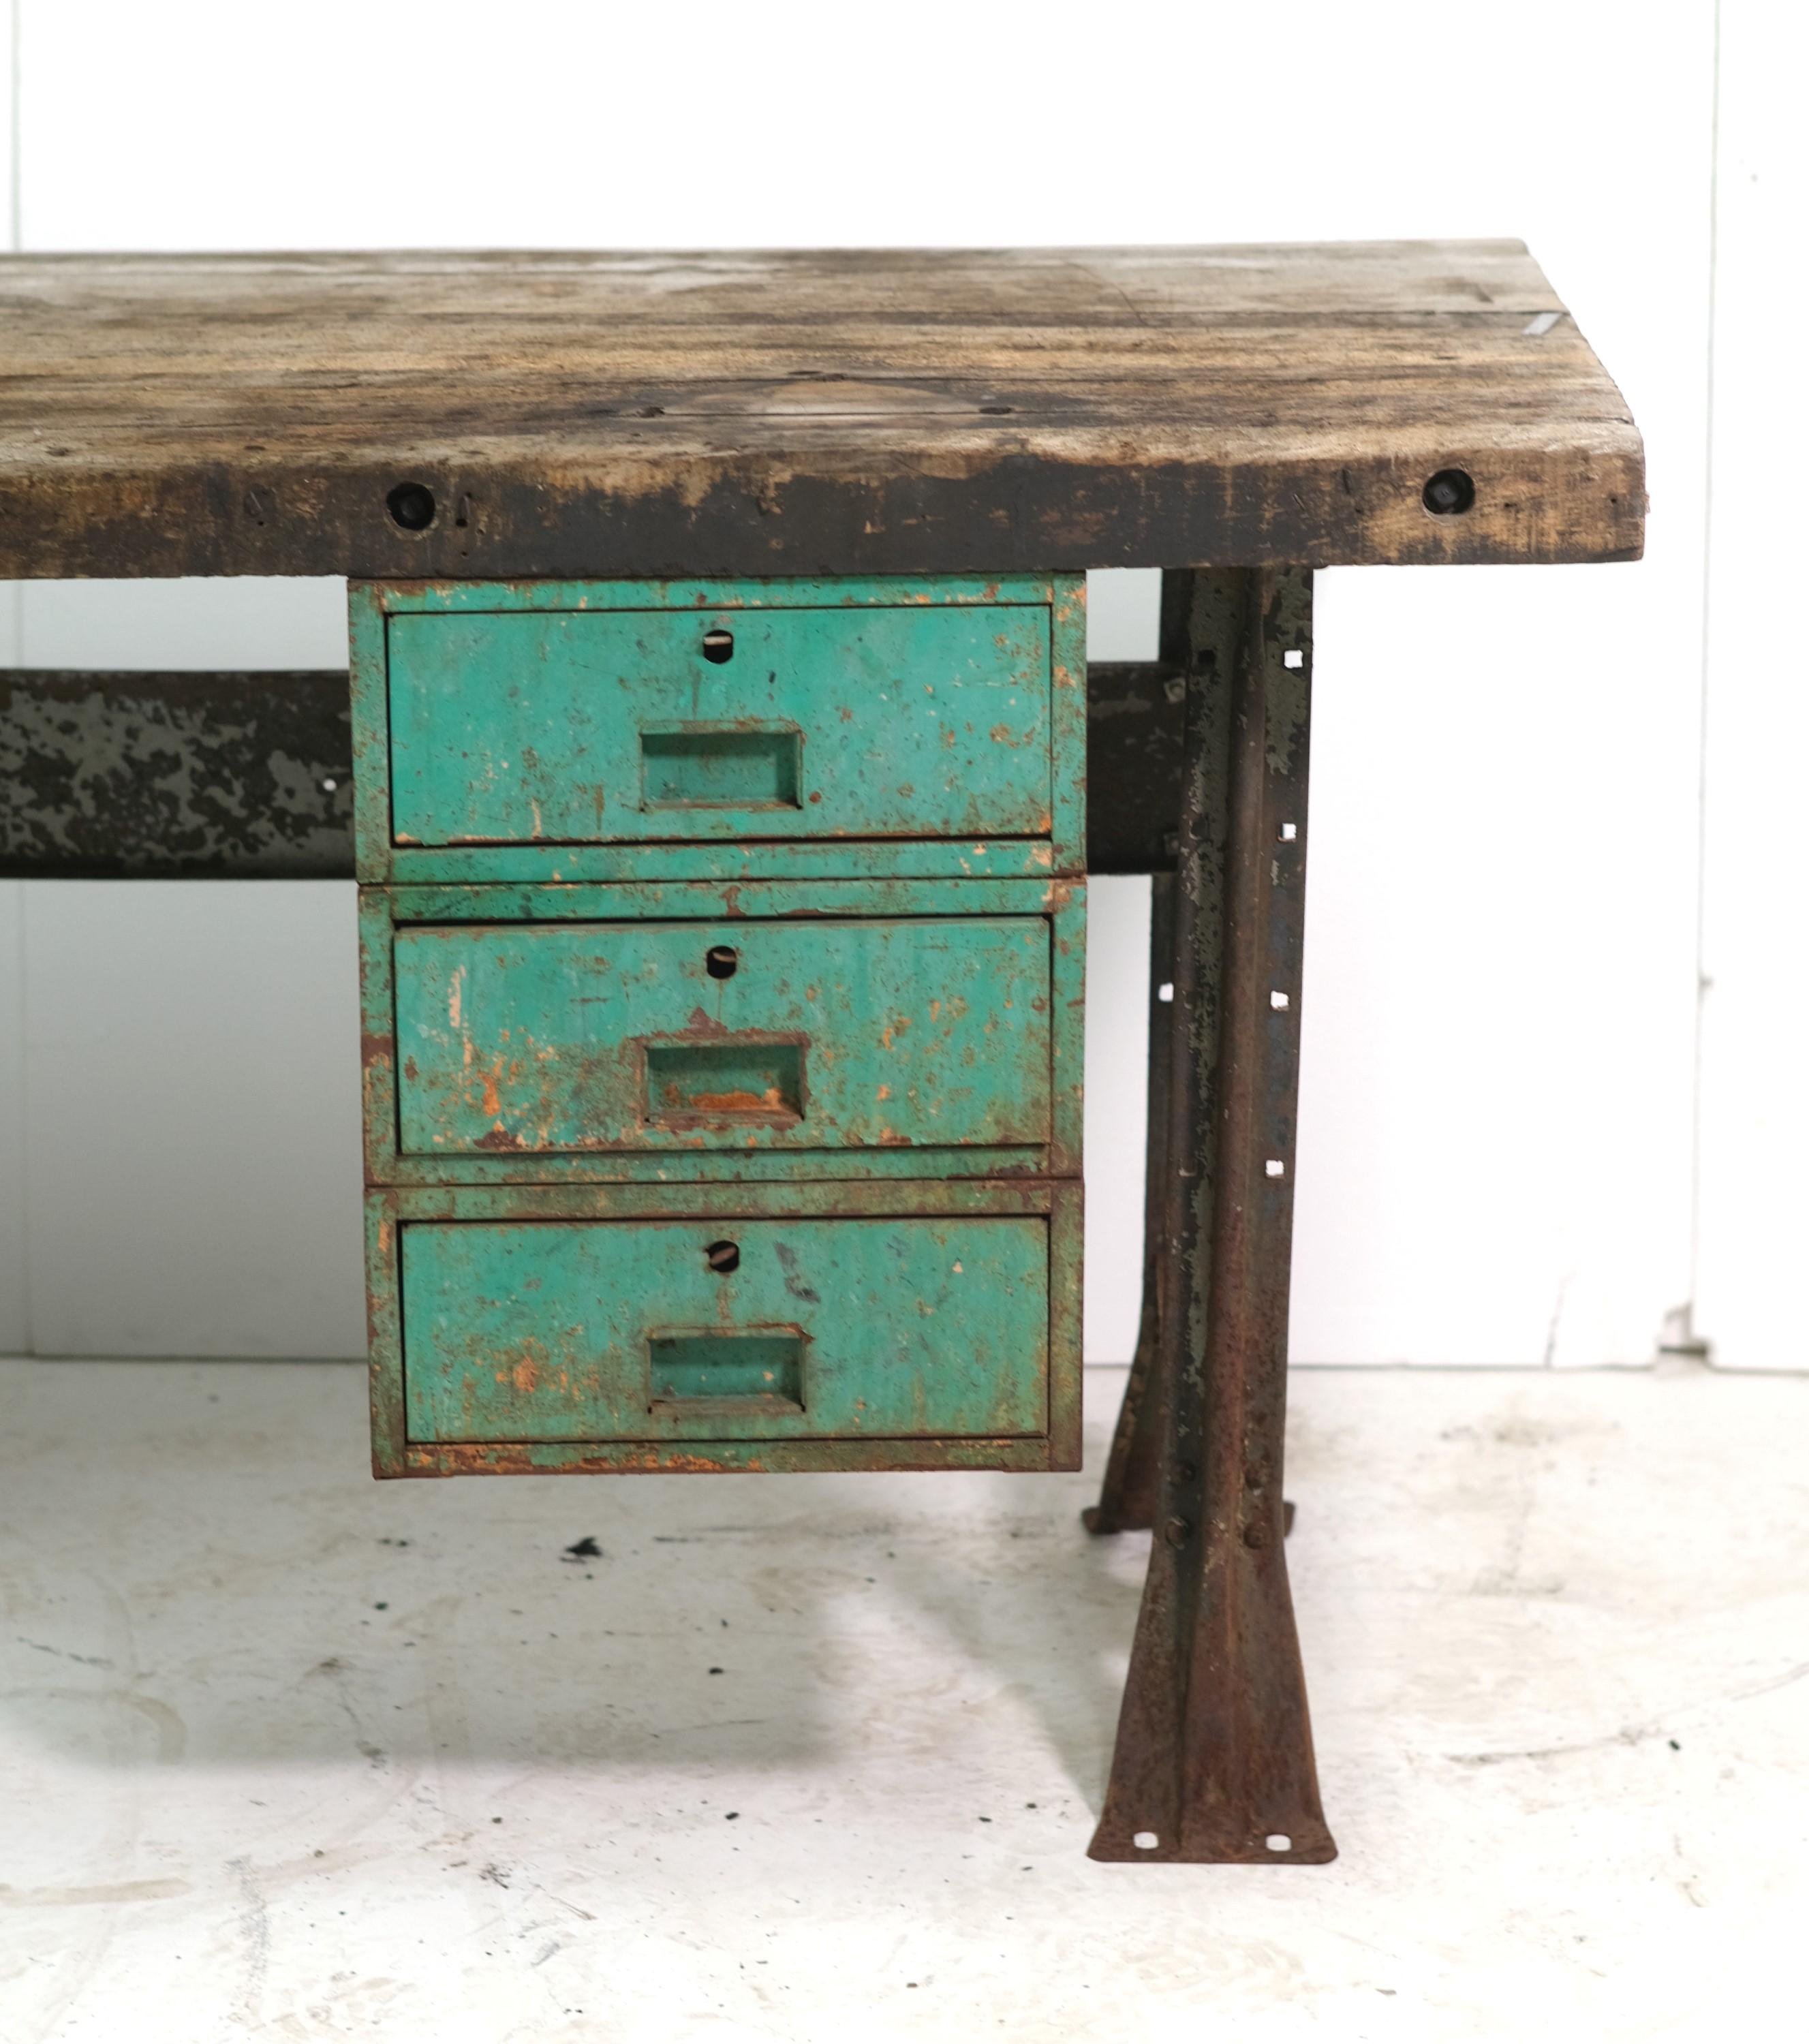 Mid-20th Century heavy duty industrial work table. Has original paint and patina. Solid pine top with a steel industrial base and six drawers, three on each side. Please see the images. This can be seen at our 400 Gilligan St location in Scranton,